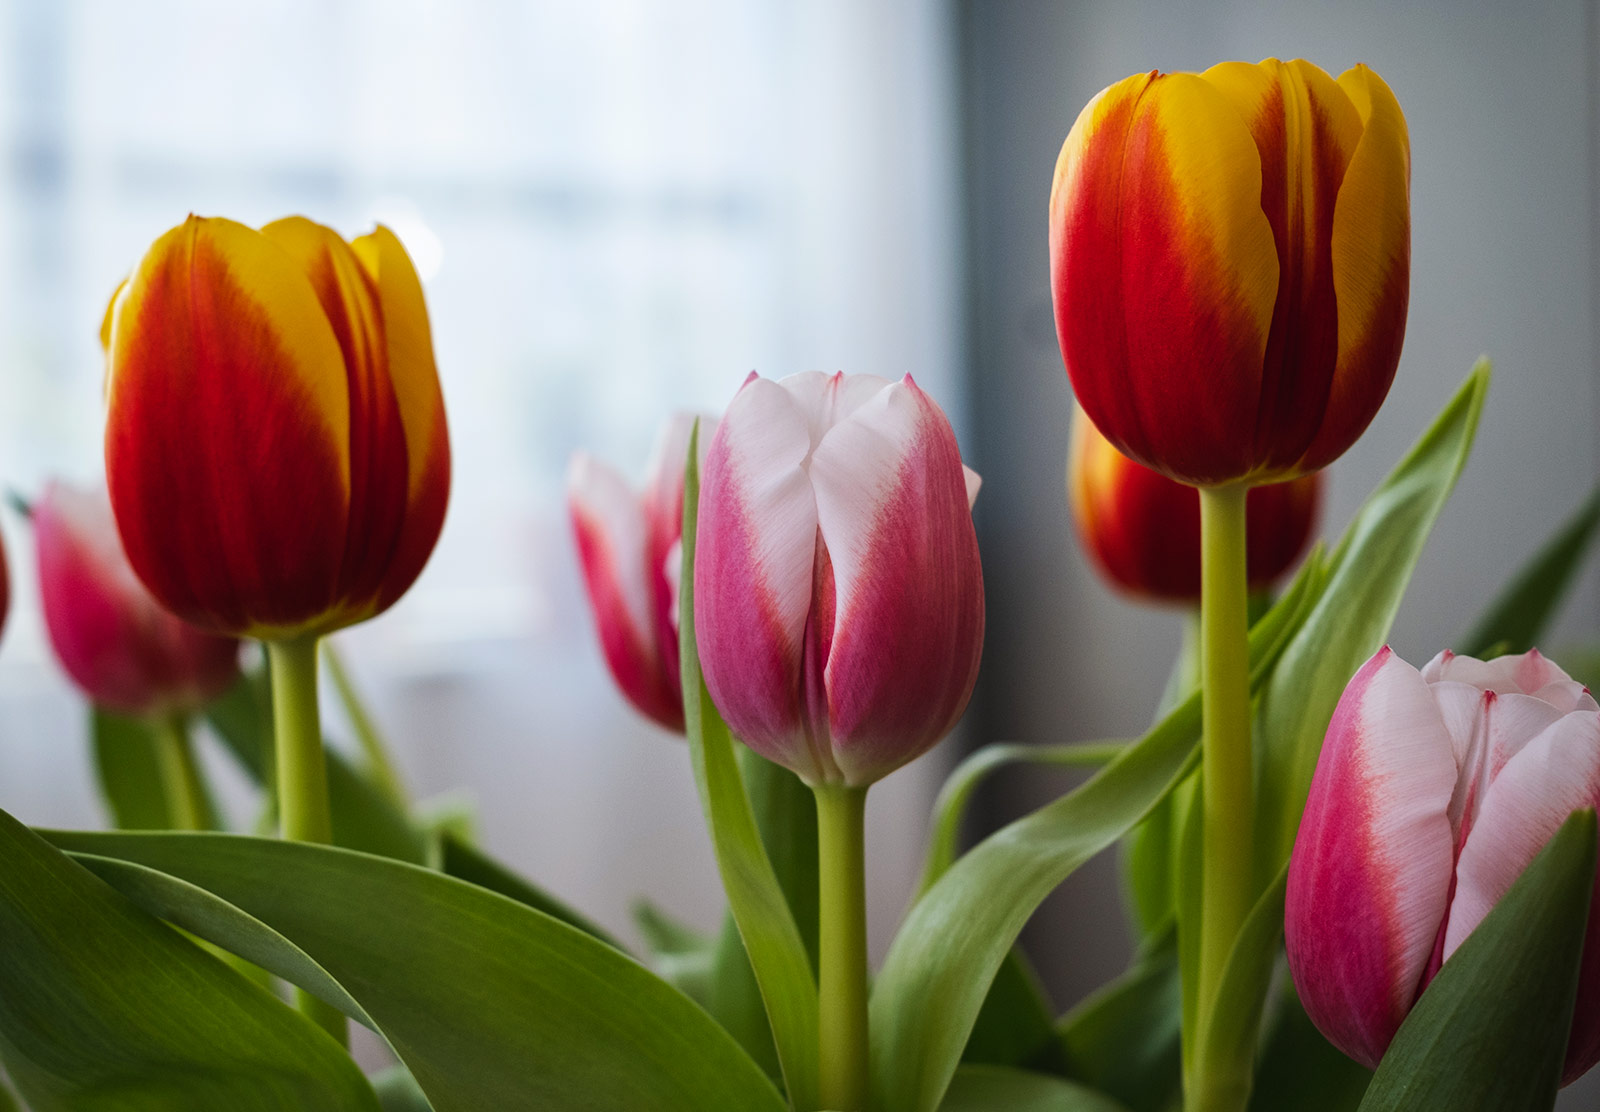 Red, yellow and pink tulips